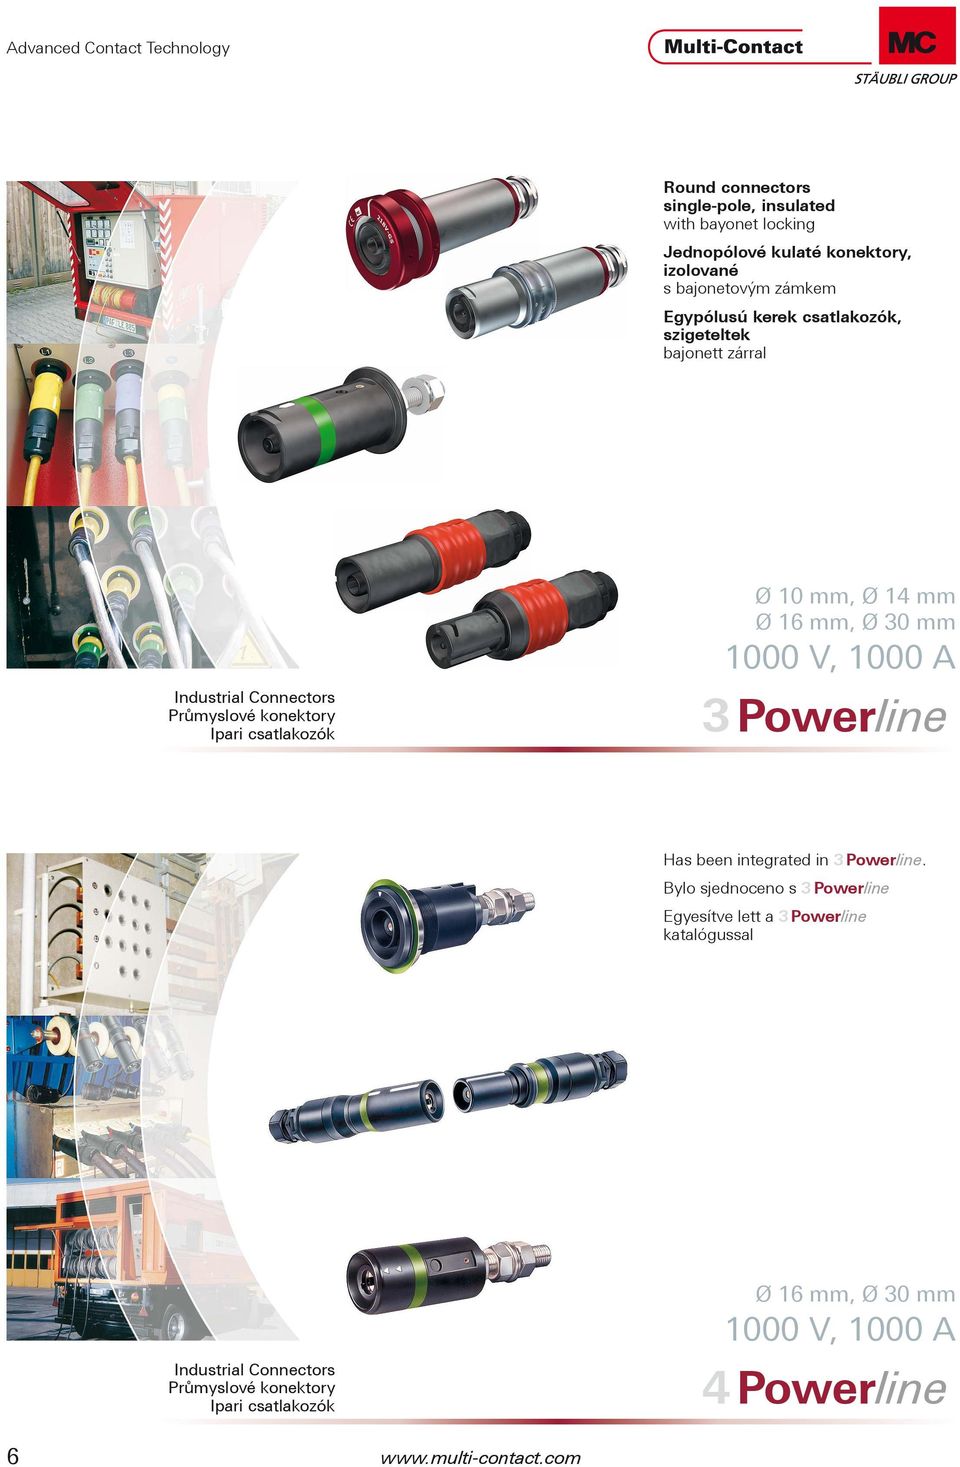 30 mm 1000 V, 1000 A 3 Powerline Has been integrated in 3 Powerline.